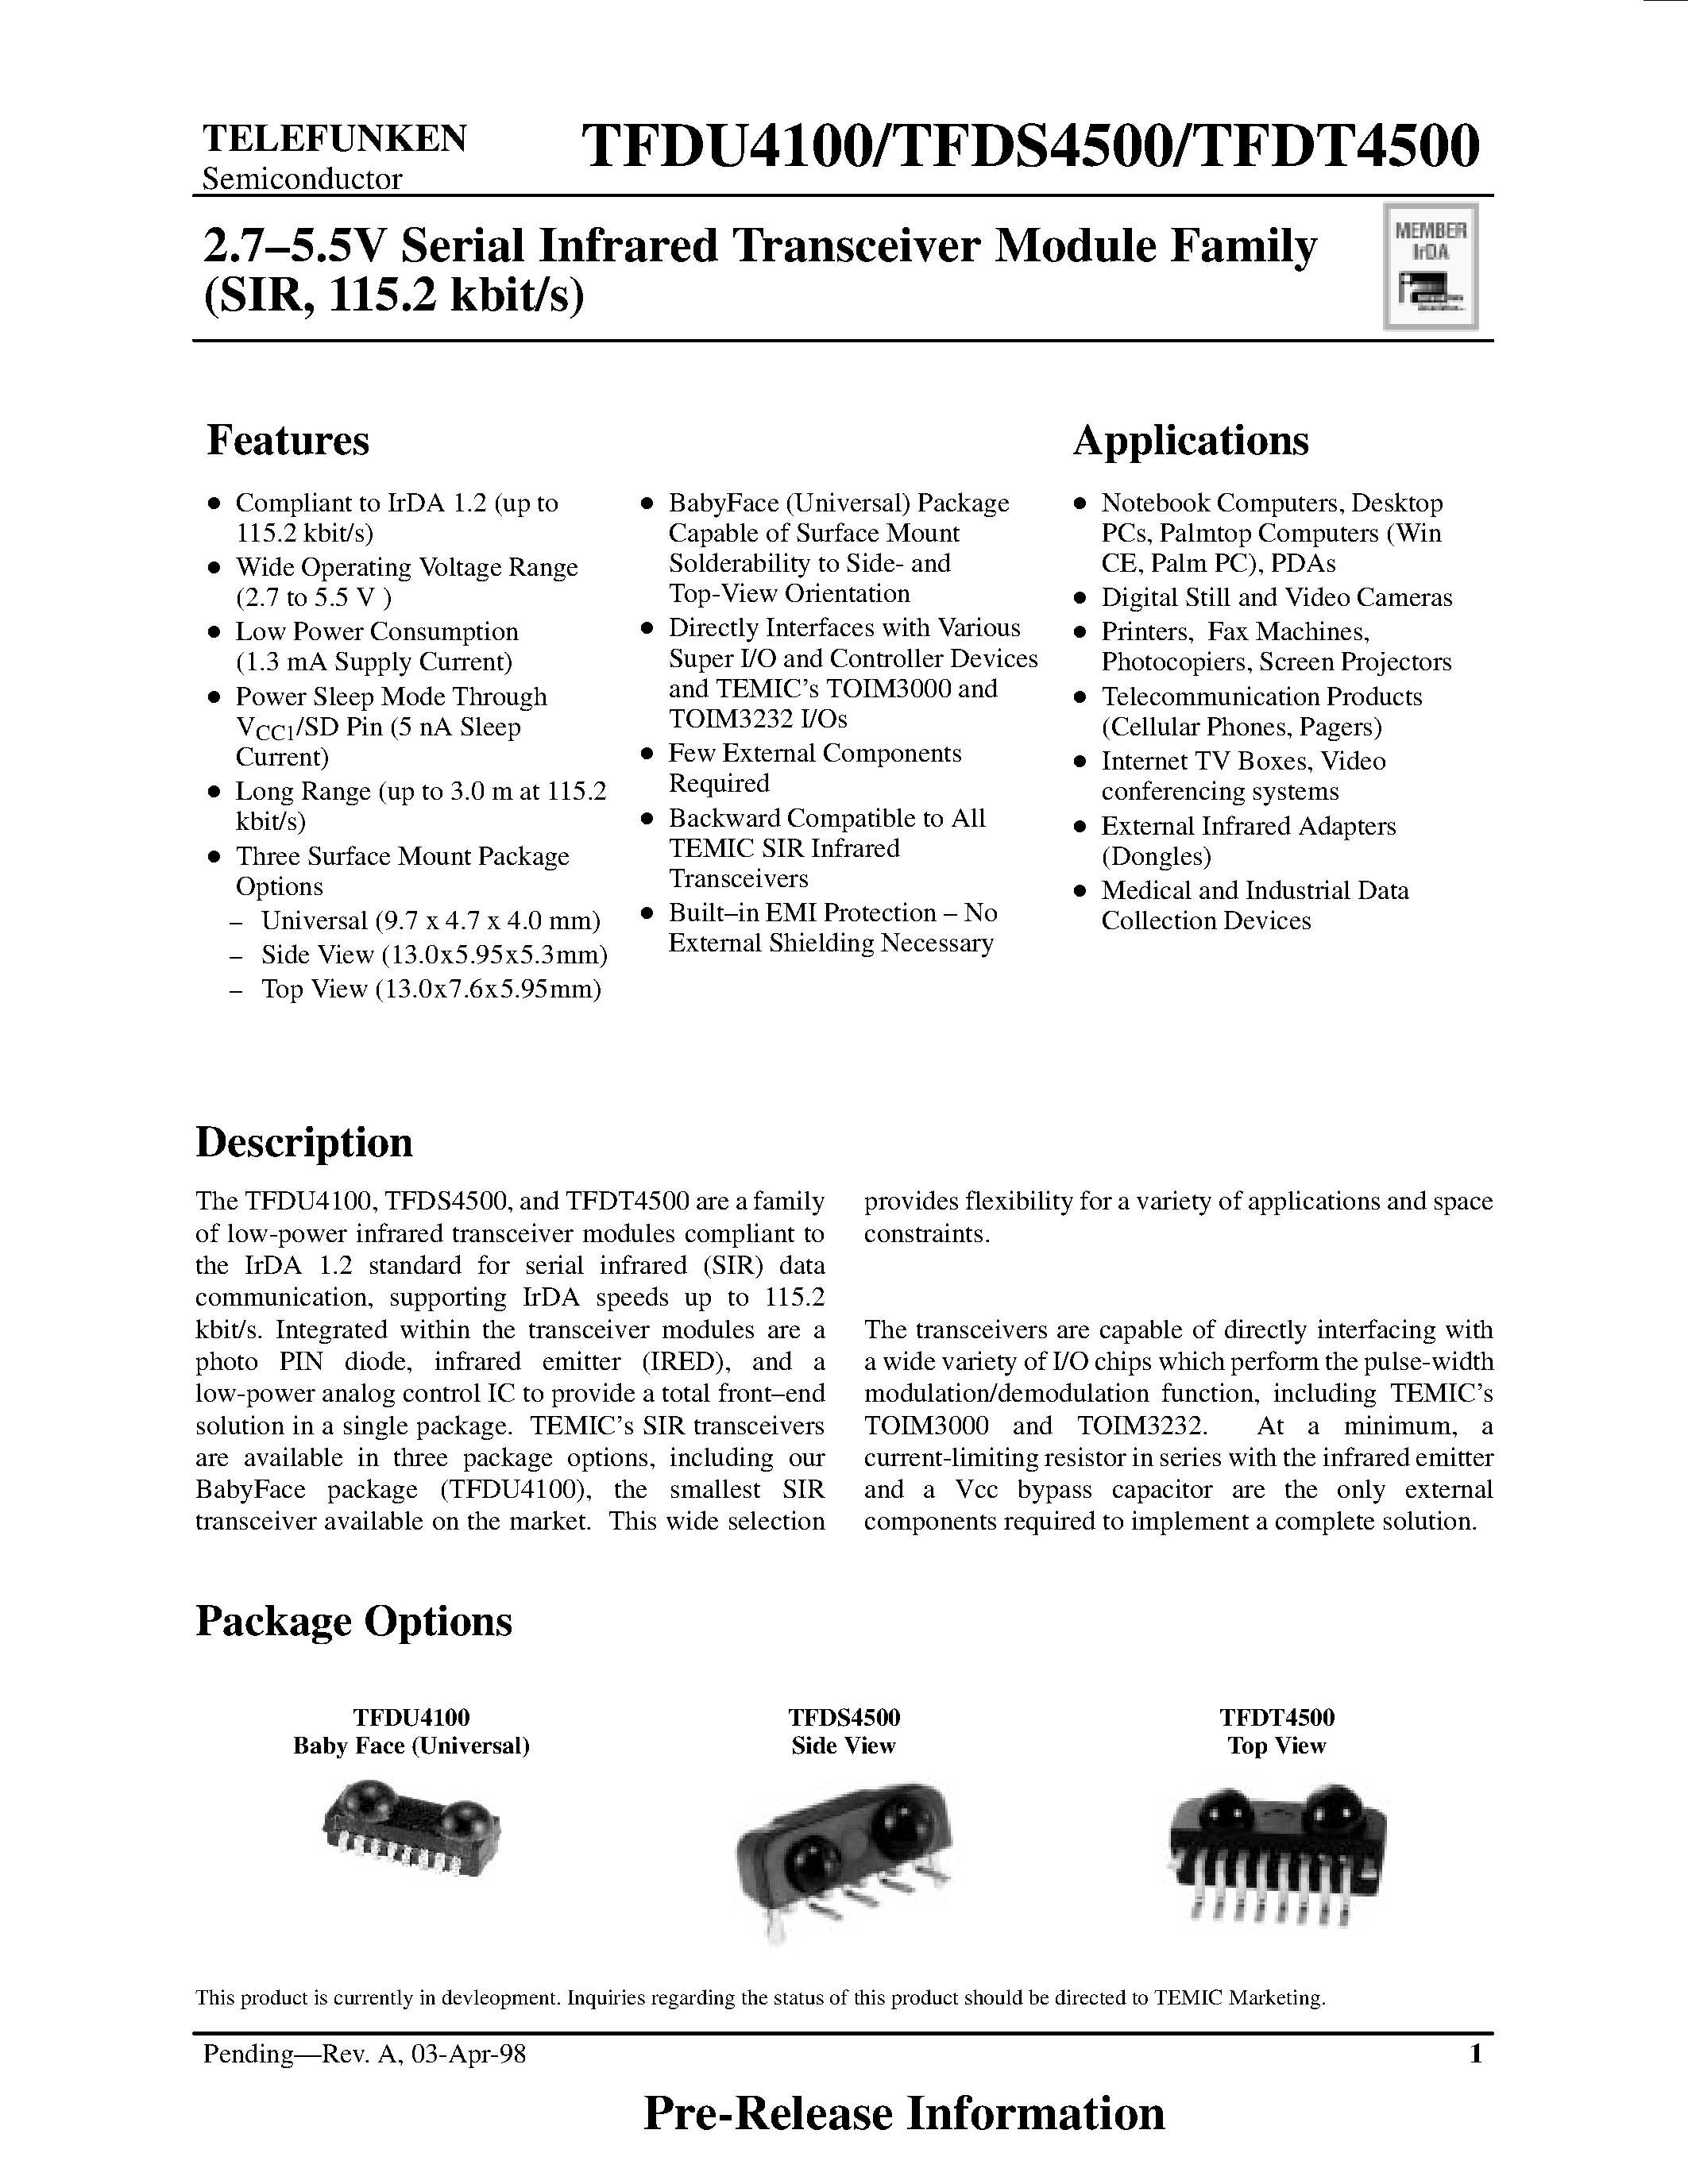 Datasheet TFDS4500 - 2.7-5.5V Serial Infrared Transceiver Module Family page 1